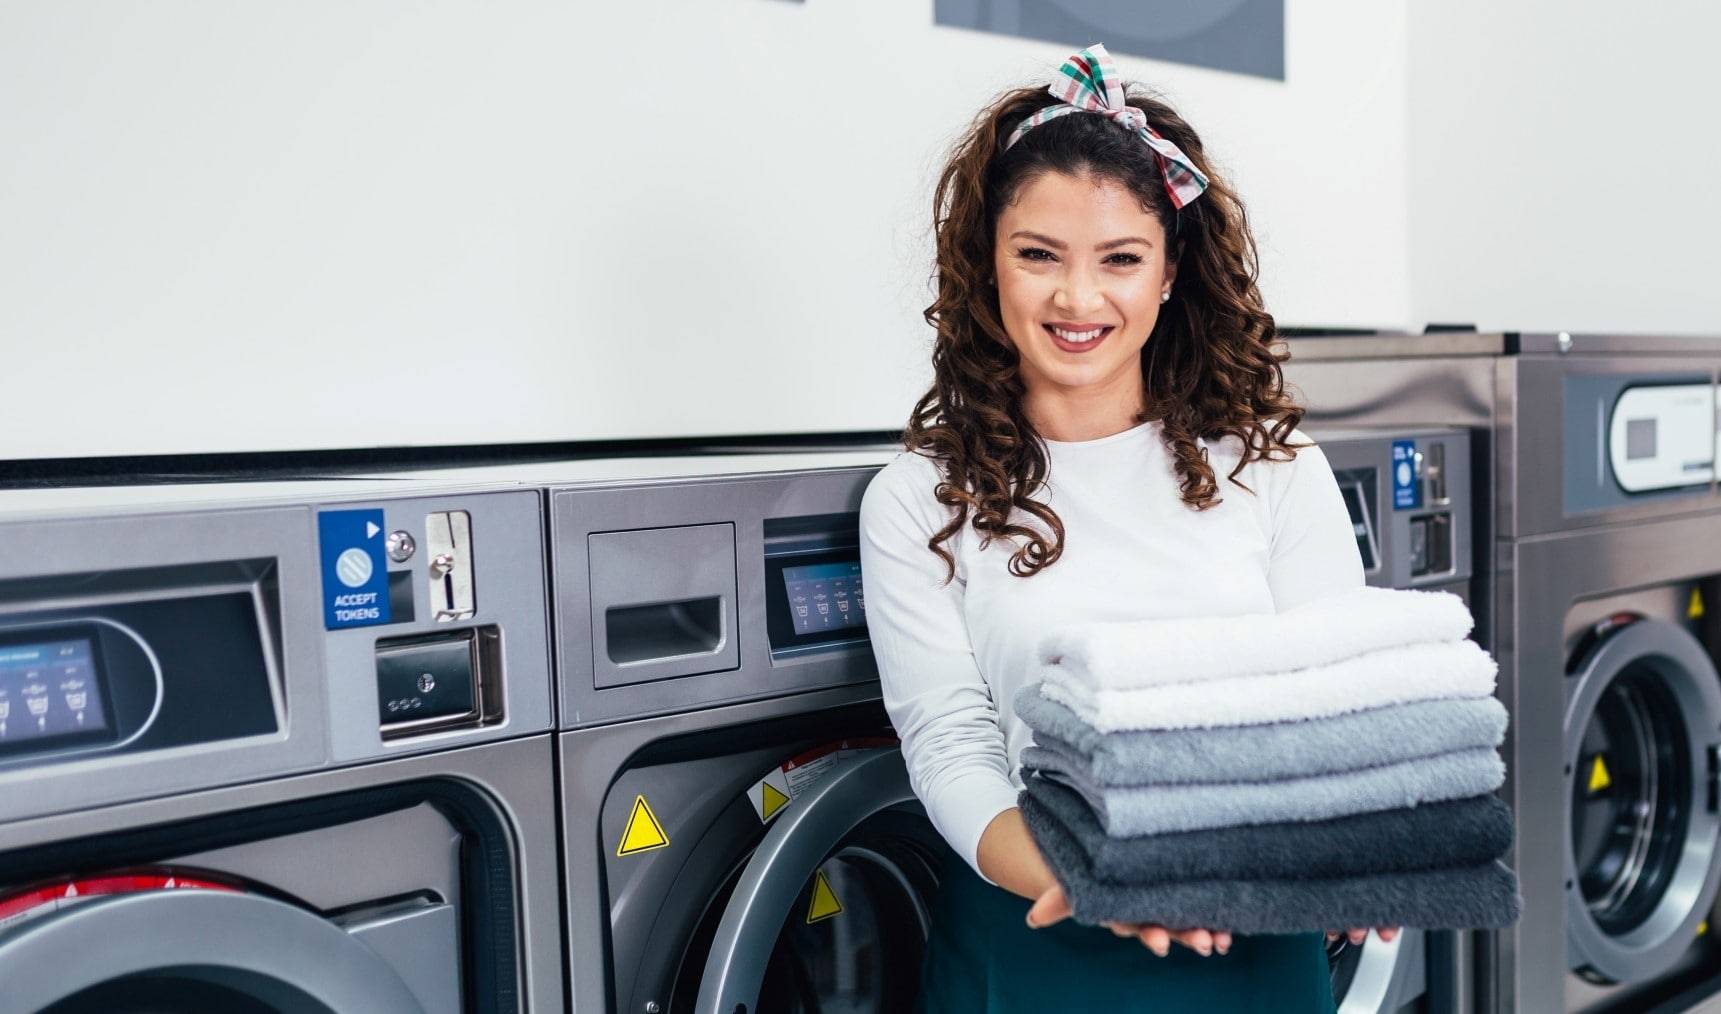 Laundry Attendant Jobs in the USA